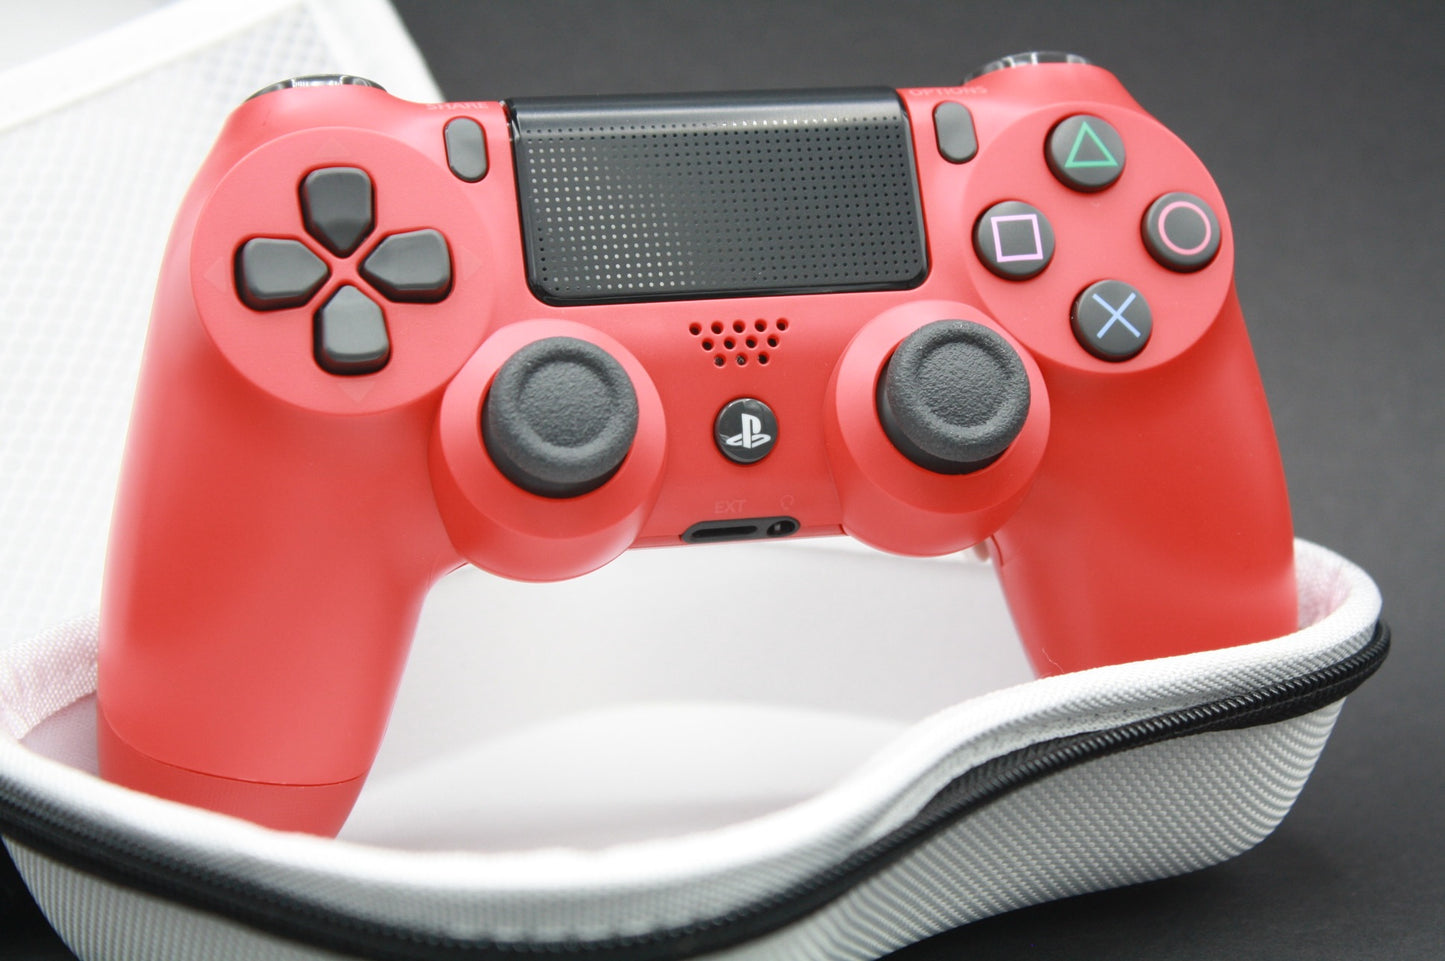 PS4 Controller "Basic Red" mit Zweier-Paddles